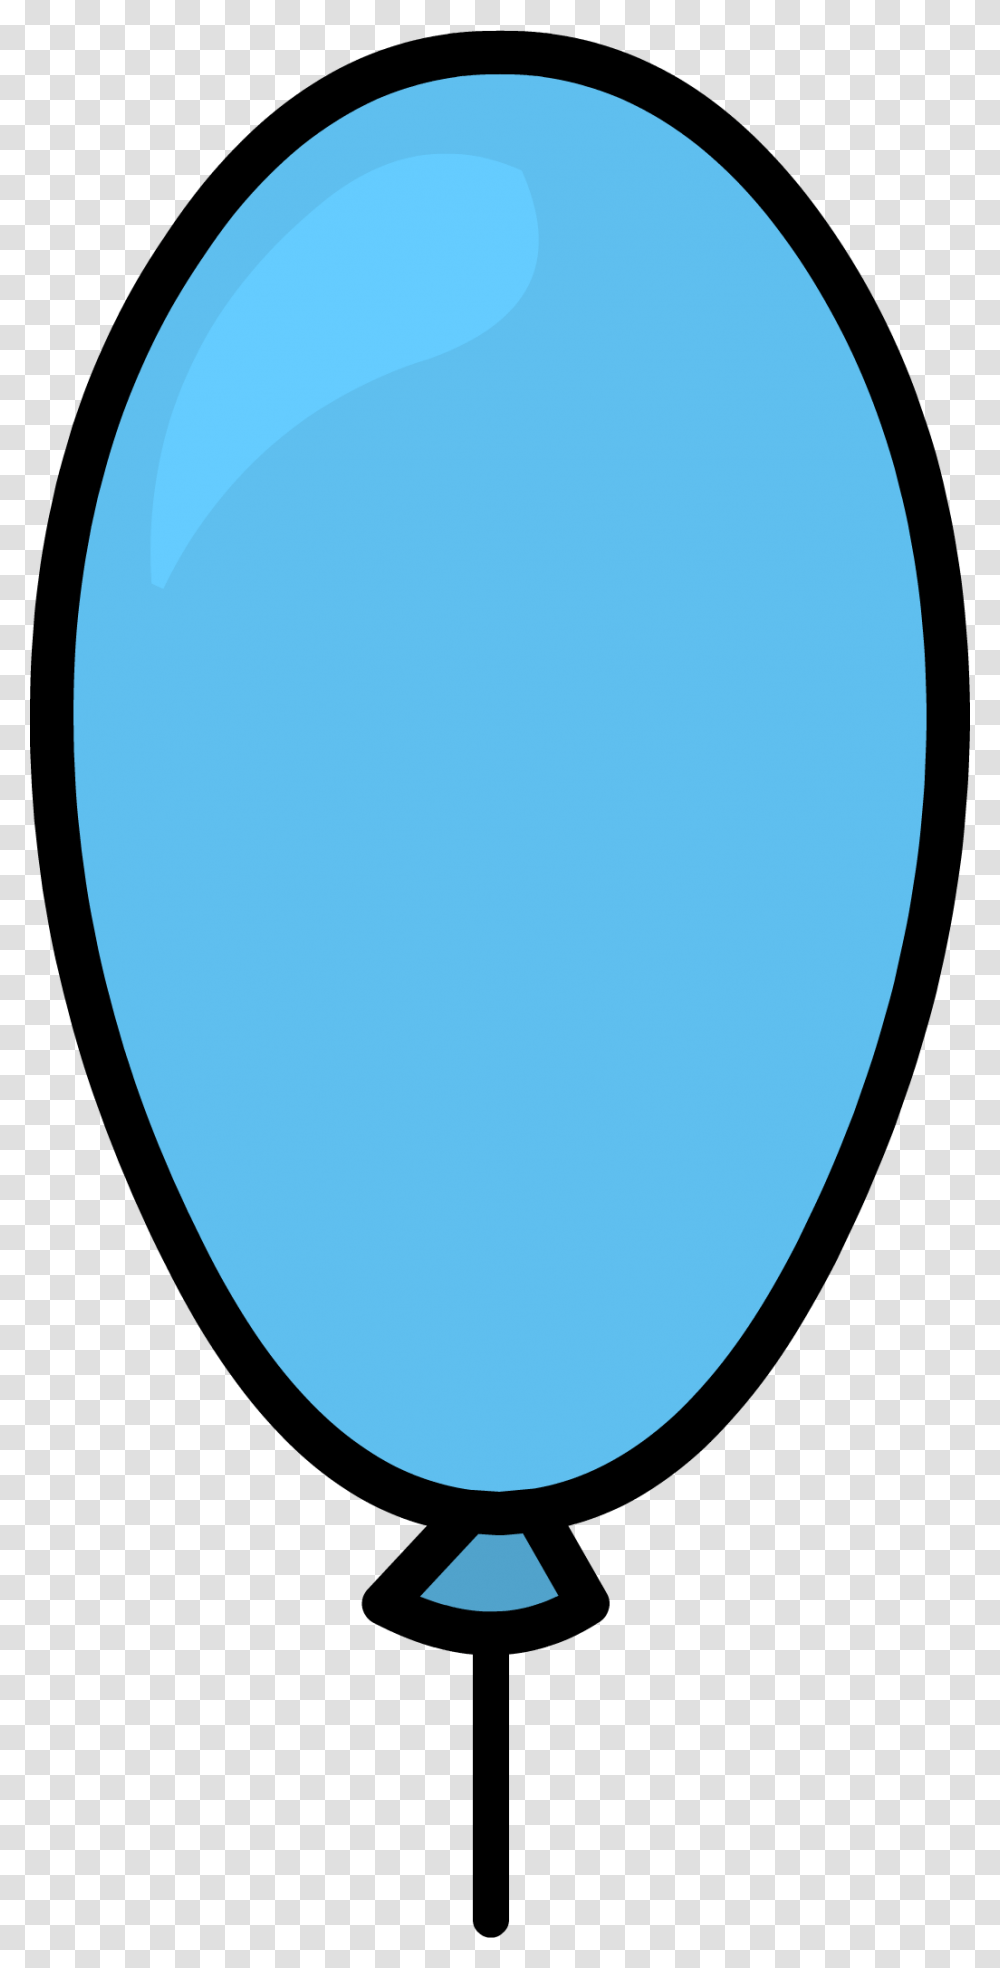 Pbs Kids Go, Balloon, Jar, Oval, Armor Transparent Png